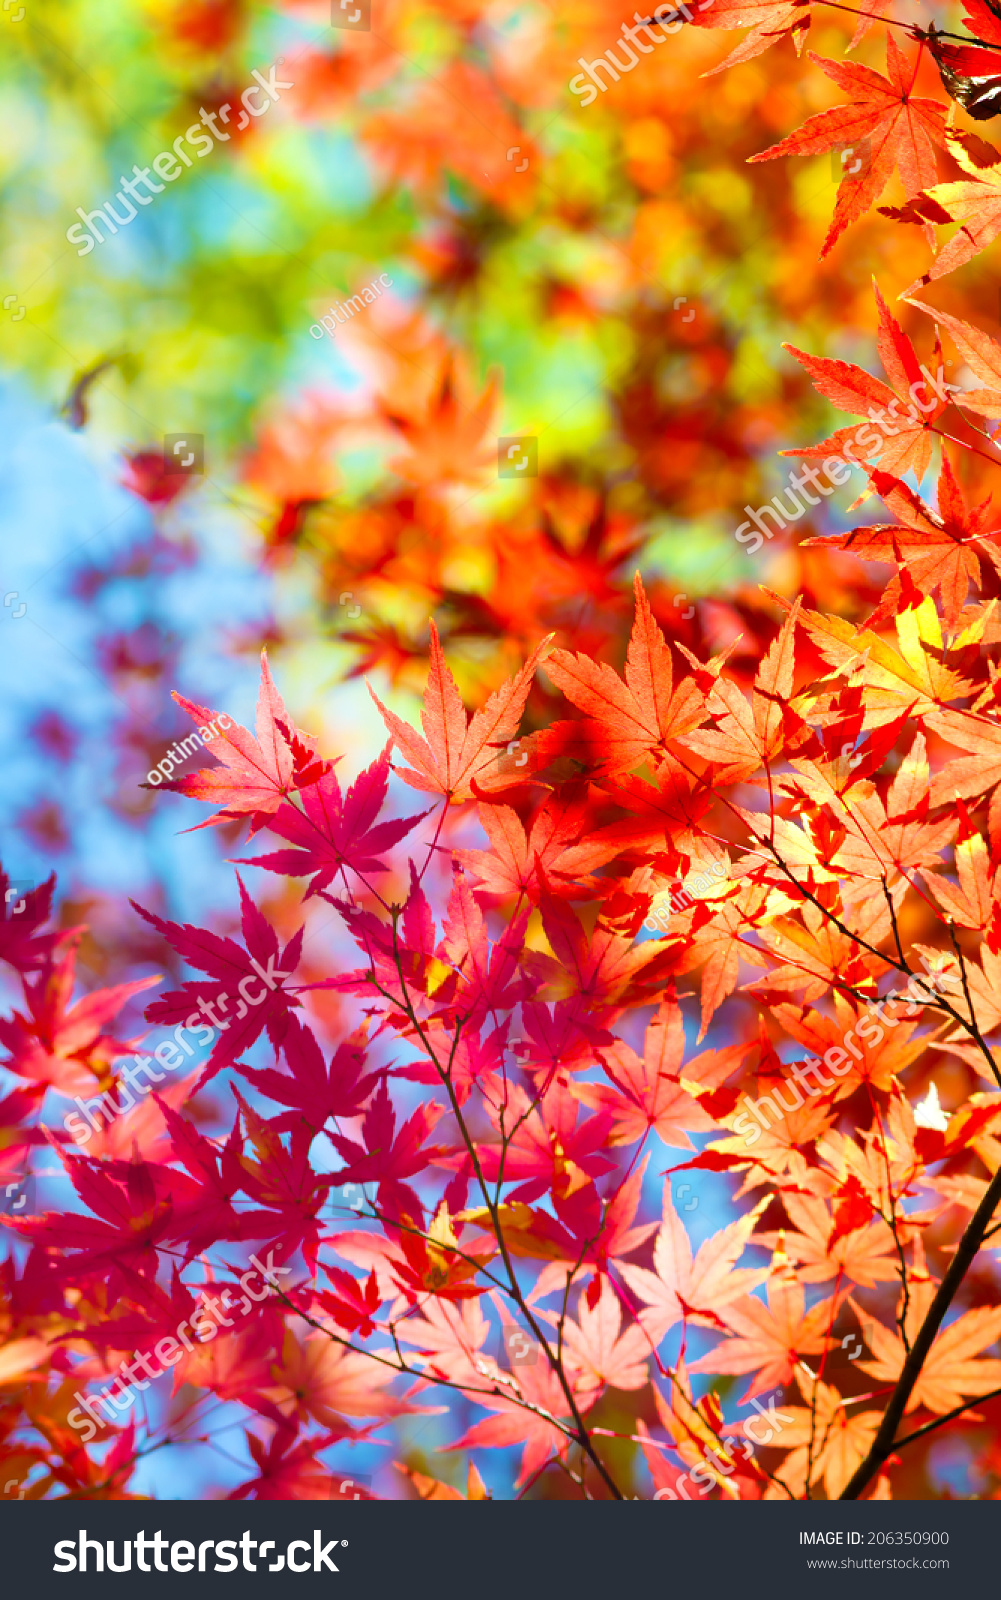 Beautiful Transitions Of Colors Of Autumn. Colorful Spectrum Of Bright